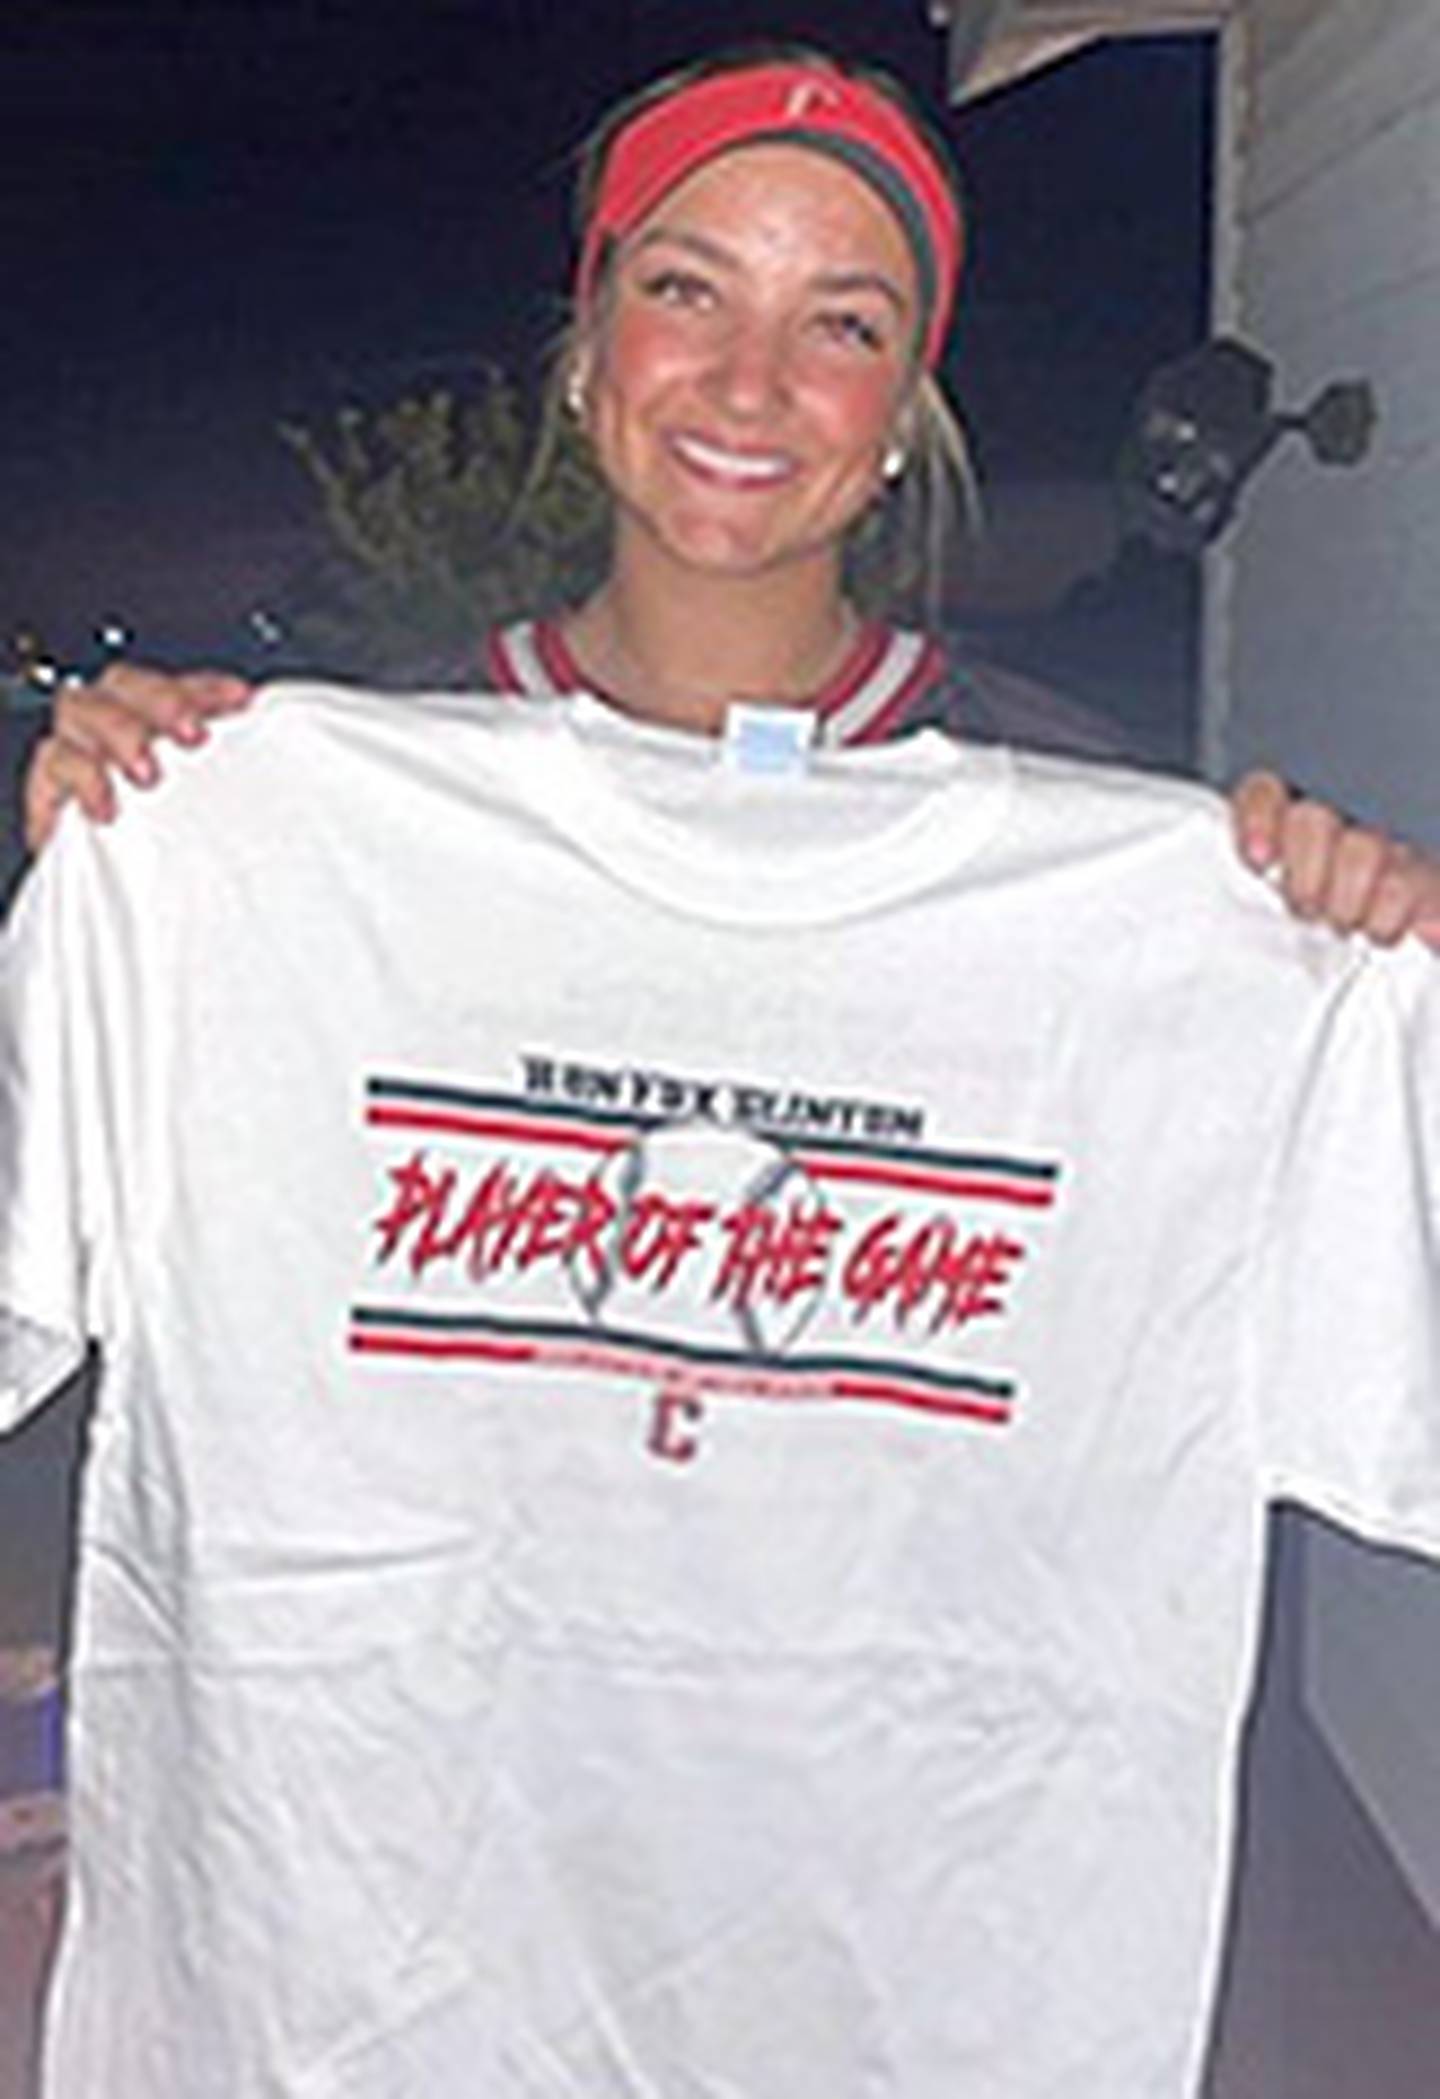 Creston's Jersey Foote shows the Ron "Fox" Clinton Player of the Game T-shirt she received after hitting a grand slam home run in a 6-5 win over Earlham Saturday night.